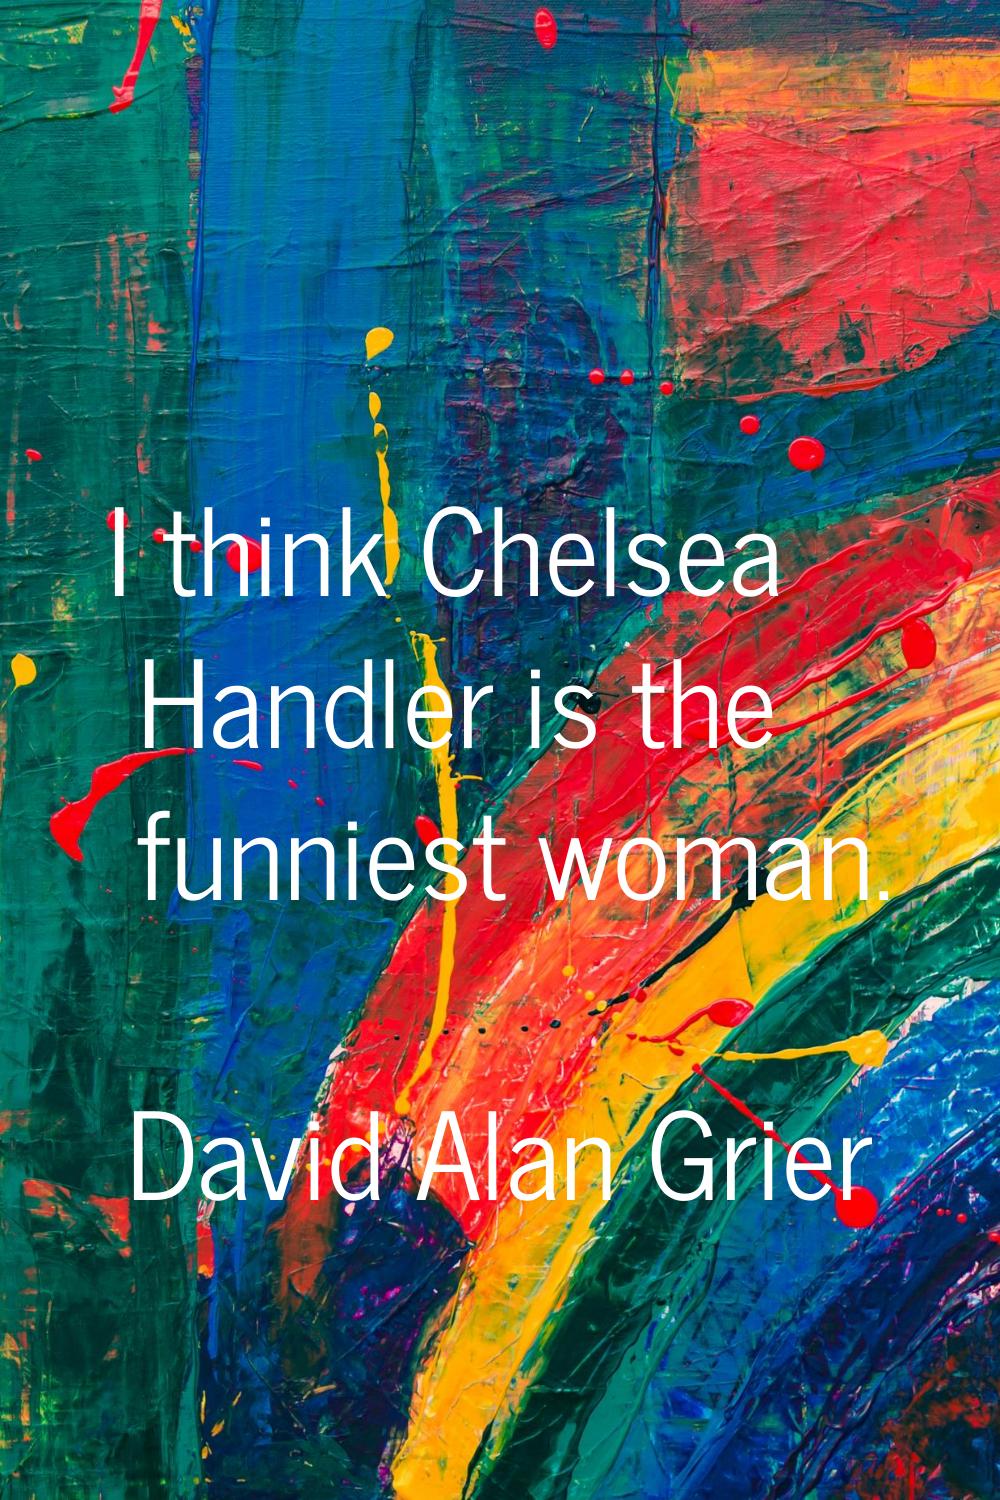 I think Chelsea Handler is the funniest woman.